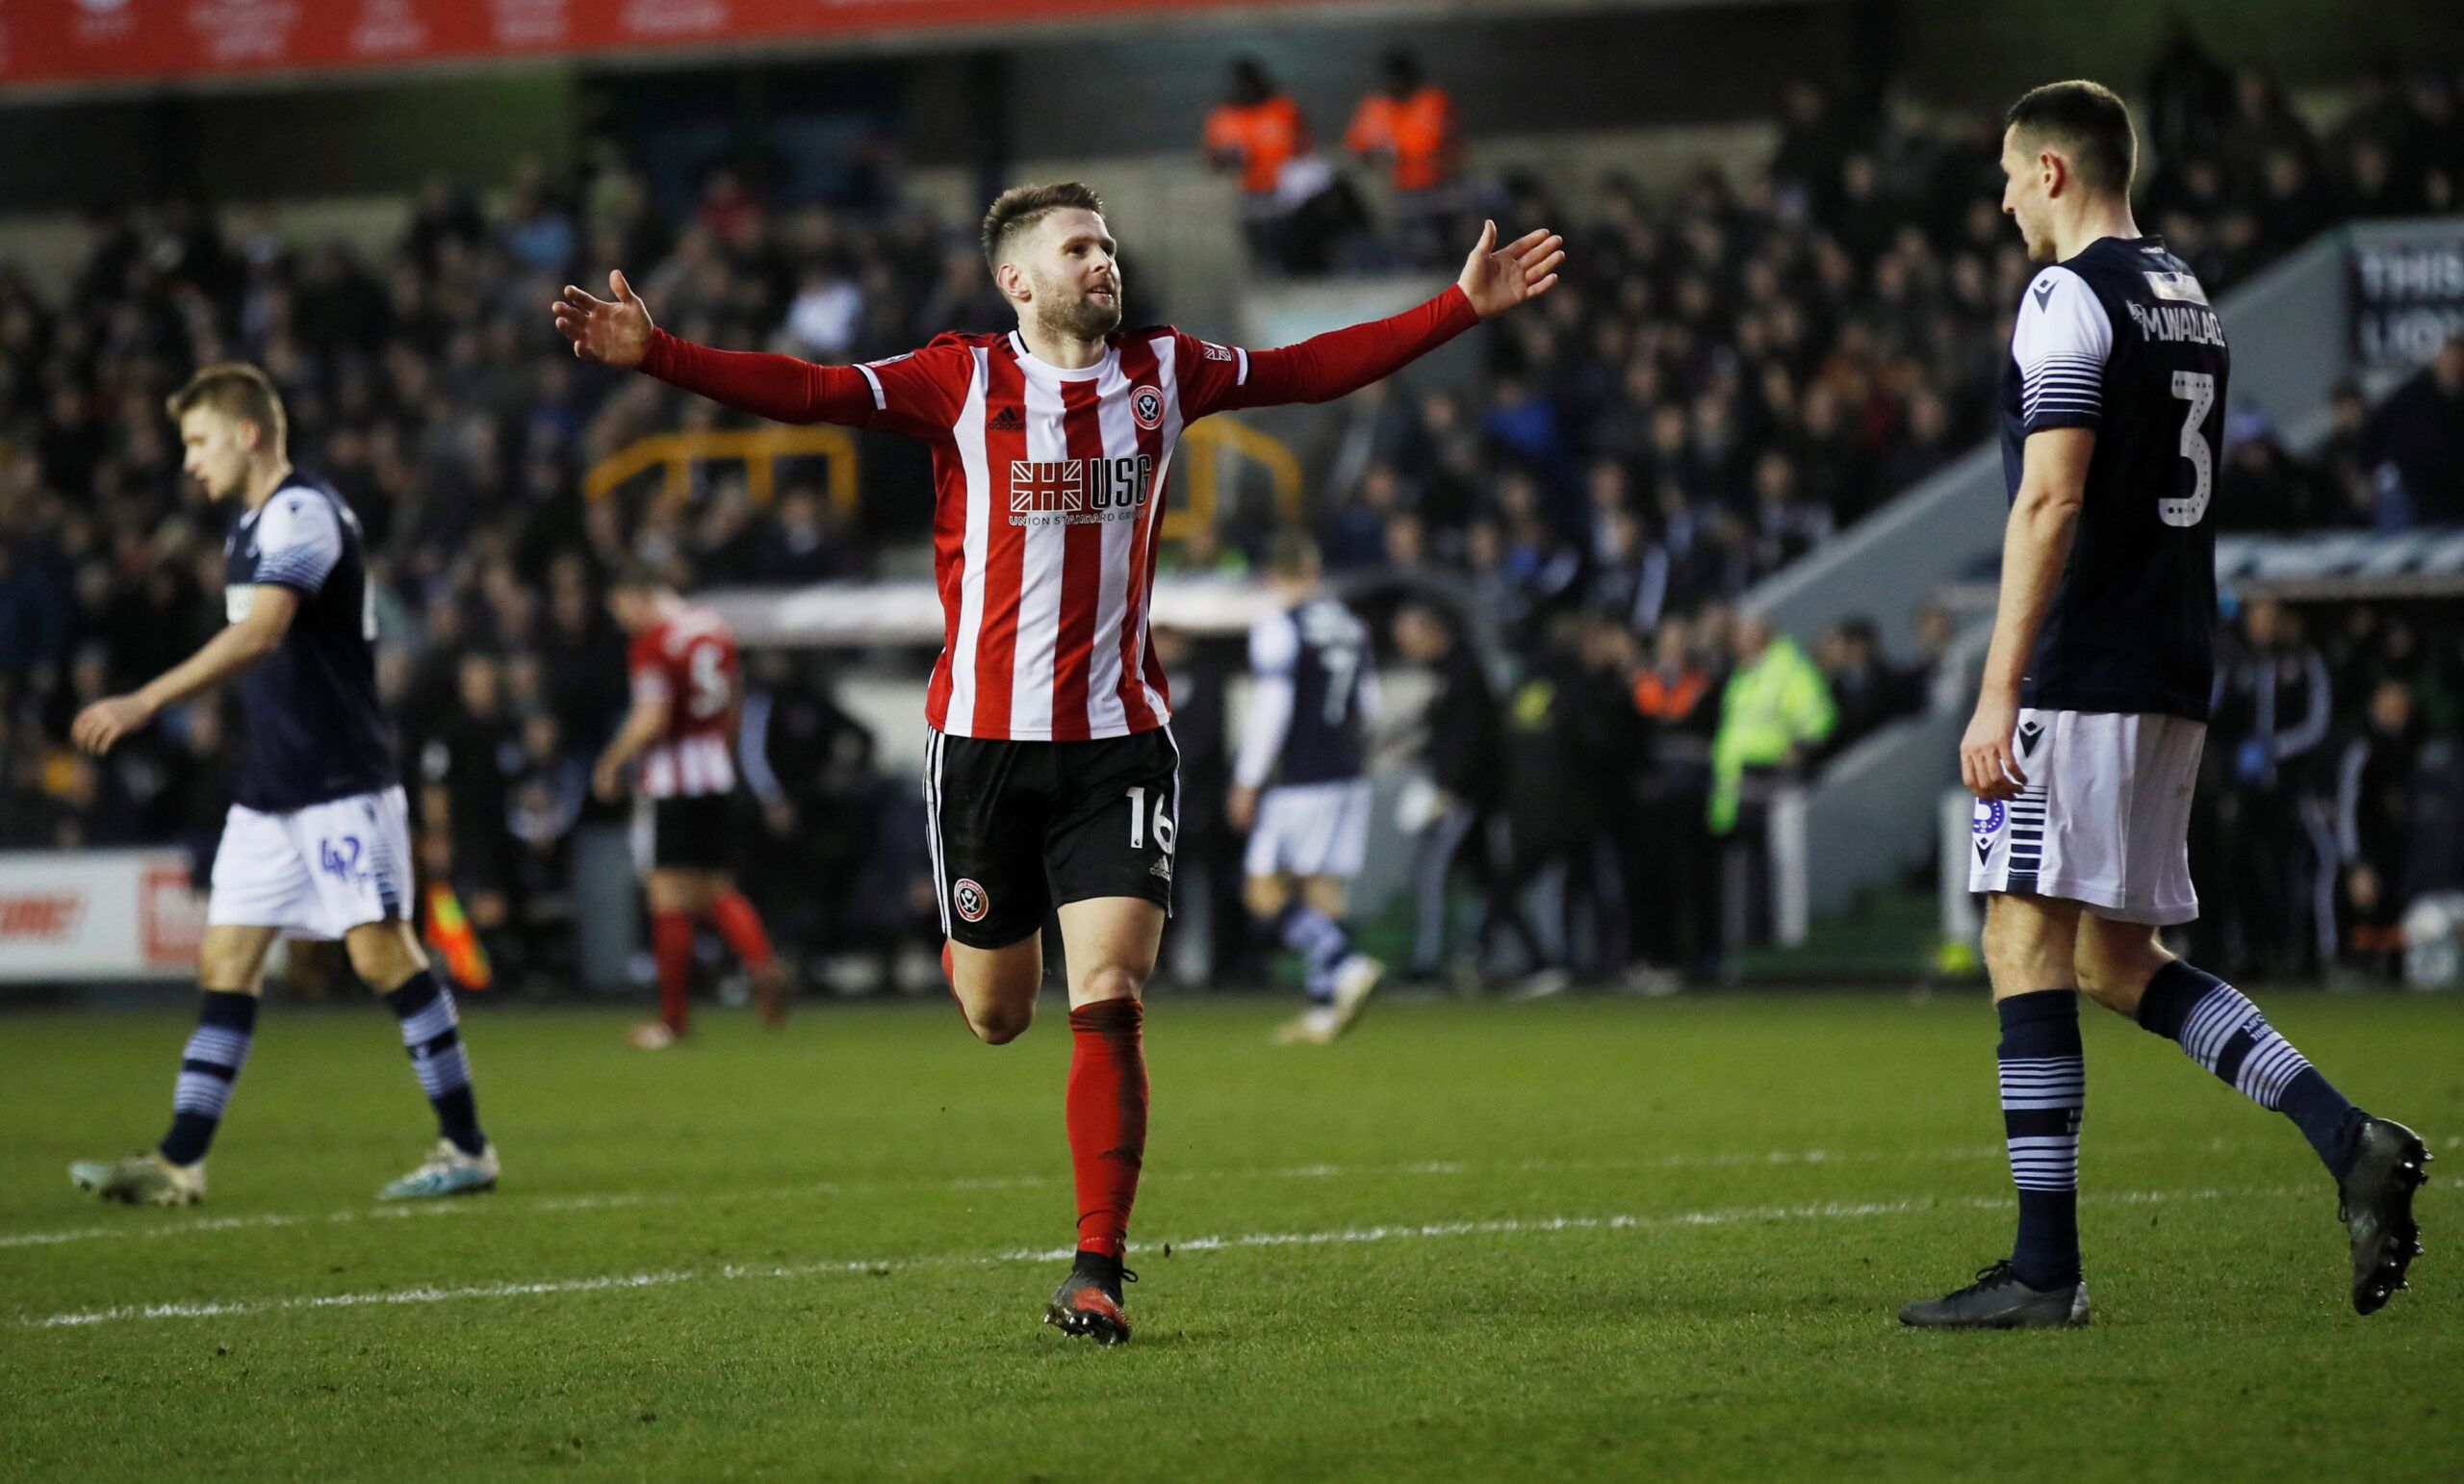 Soccer Football - FA Cup Fourth Round - Millwall v Sheffield United - The Den, London, Britain - January 25, 2020  Sheffield United's Oliver Norwood celebrates scoring their second goal   REUTERS/David Klein